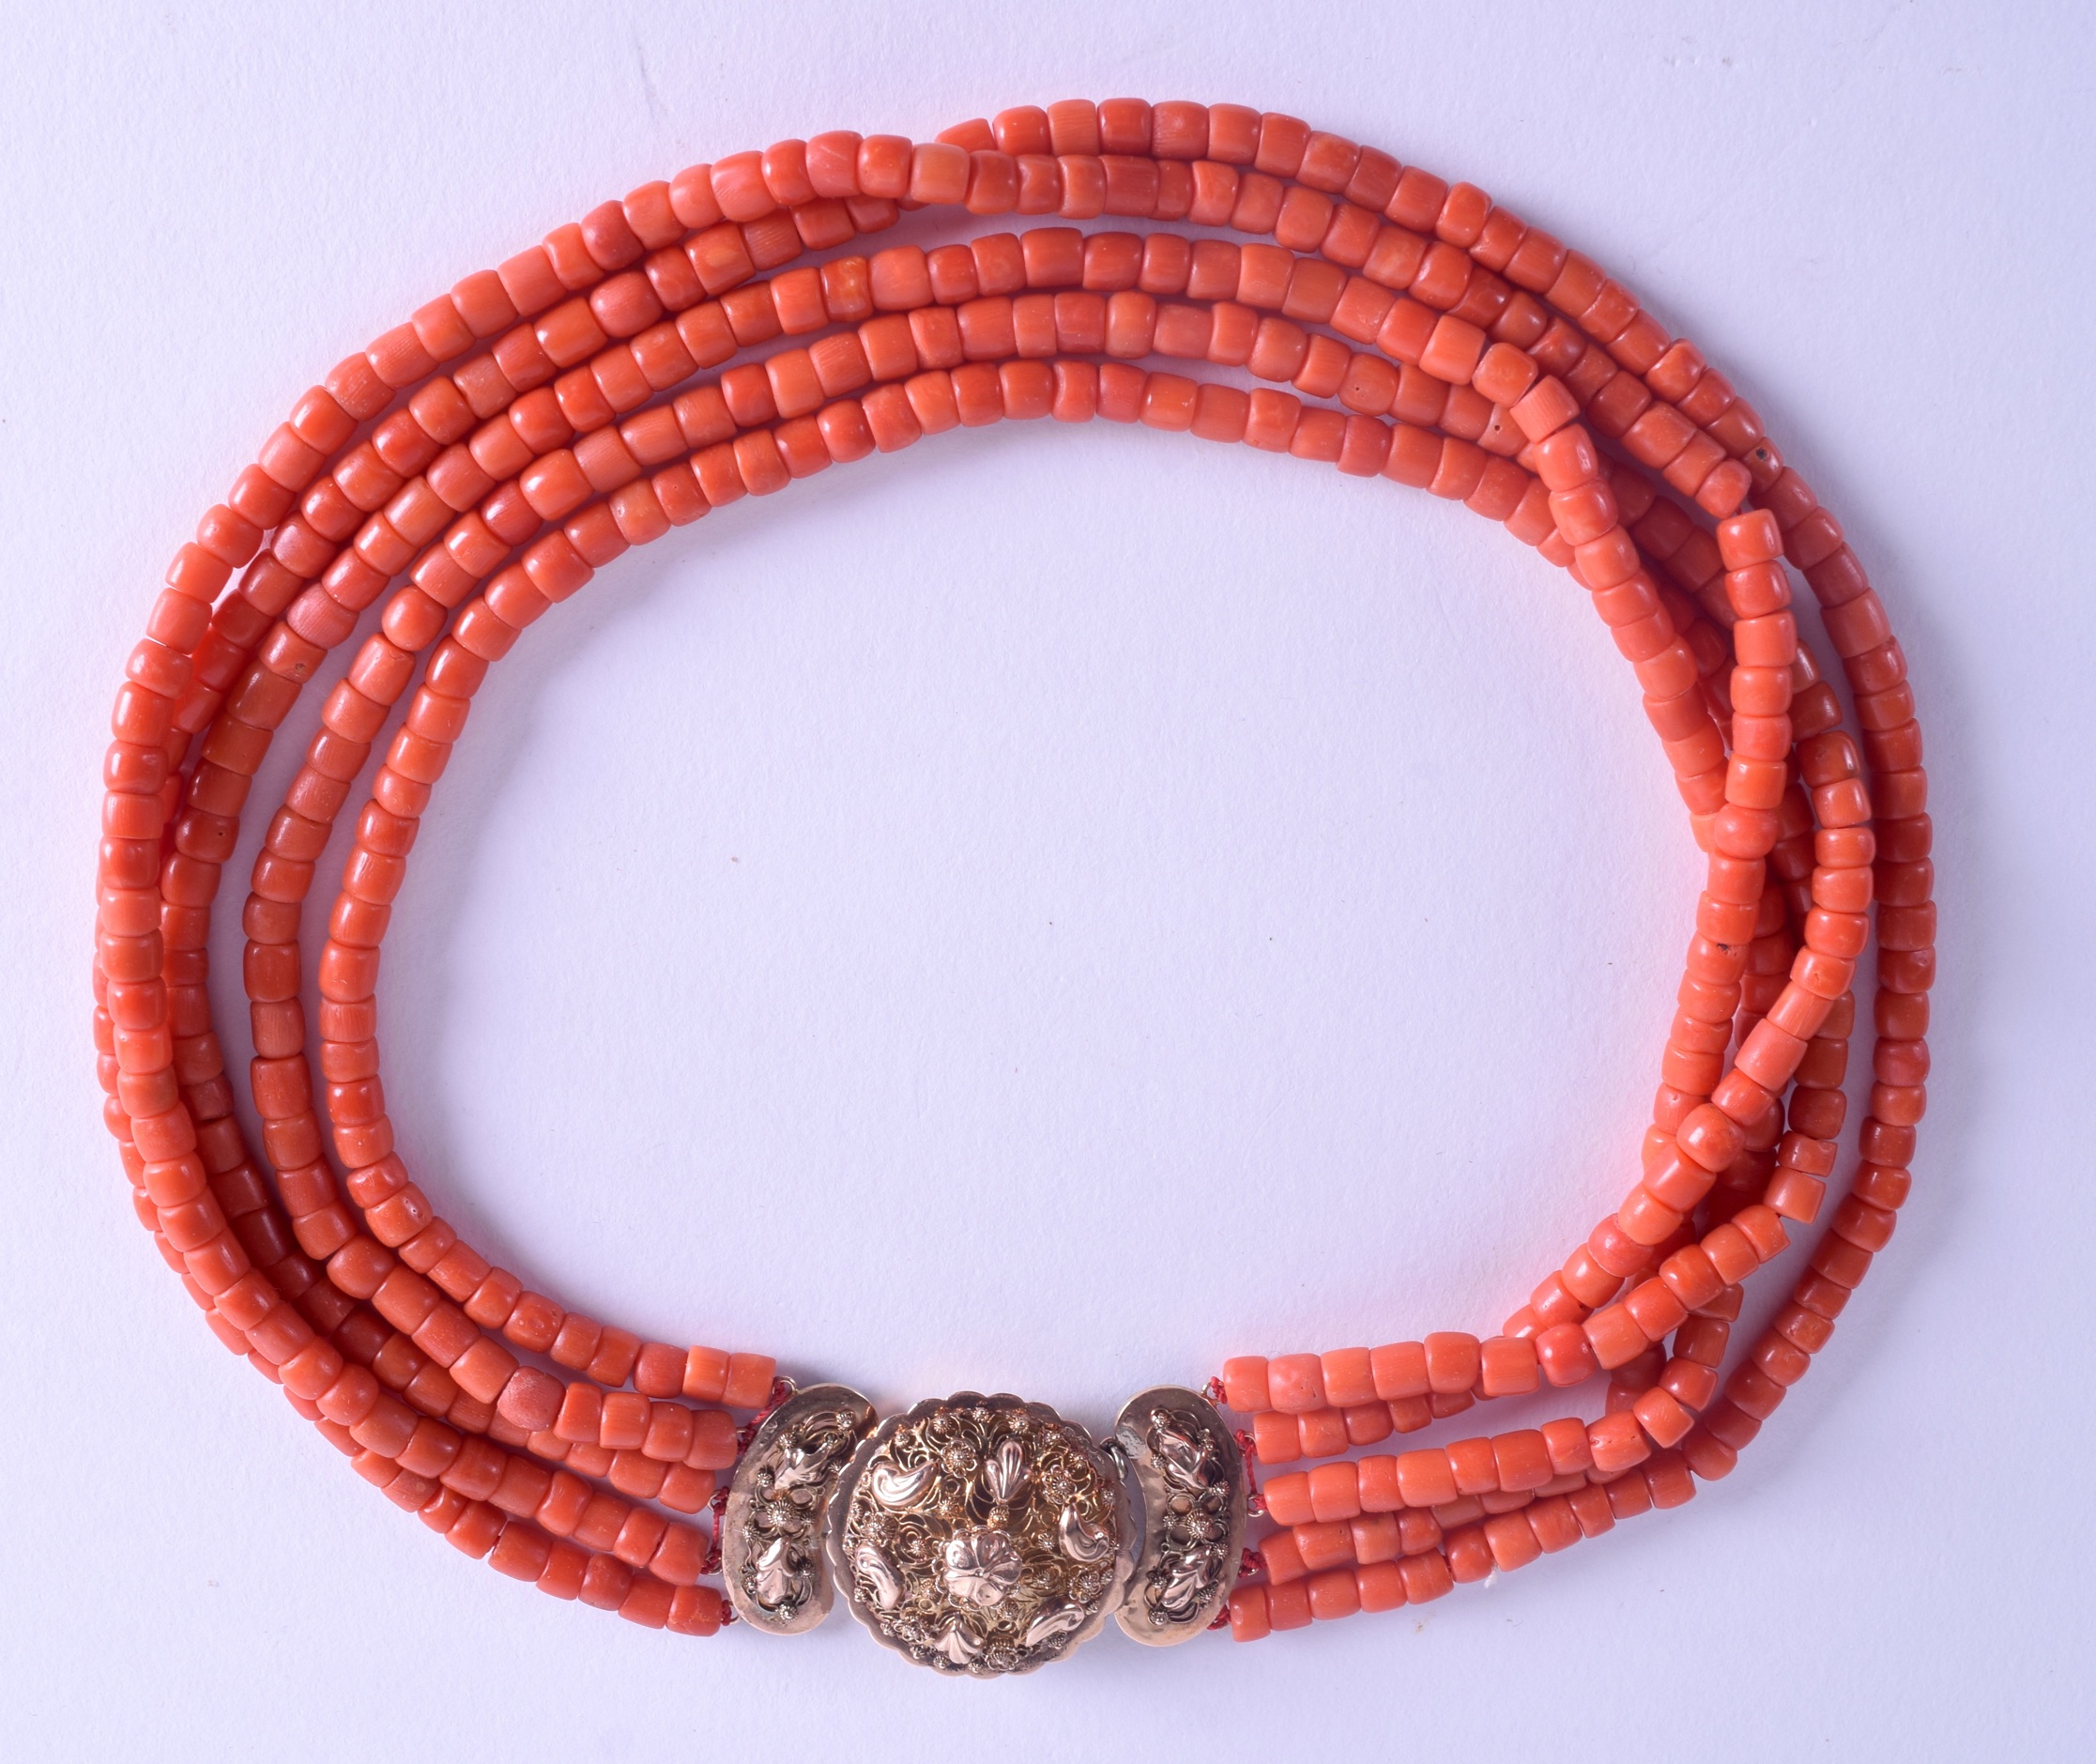 AN 18CT GOLD MOUNTED CORAL NECKLACE. 110 grams. Each strand 80 cm long, each bead 0.3 mm wide.